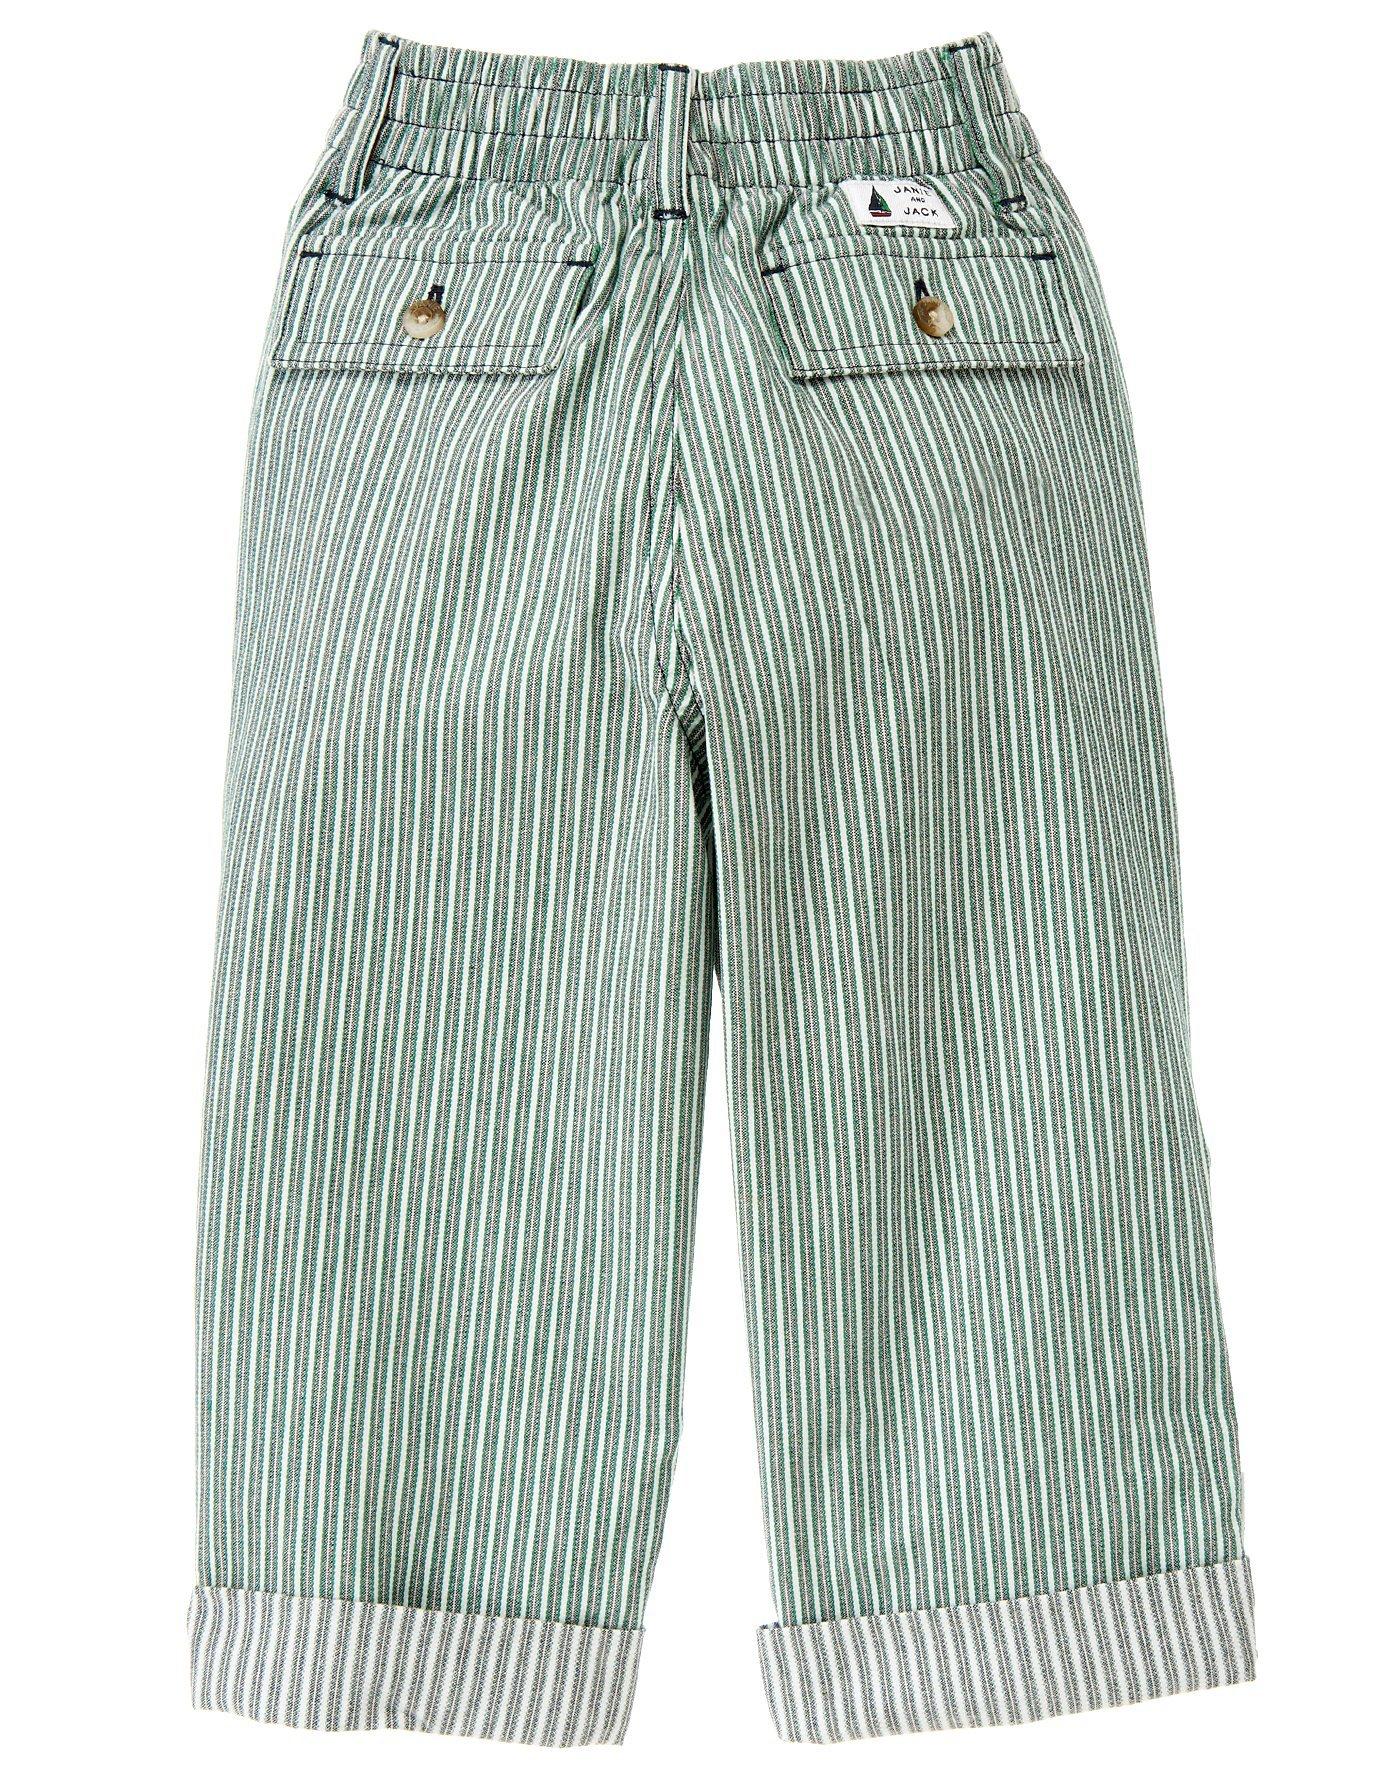 Stripe Roll Cuff Pant image number 1